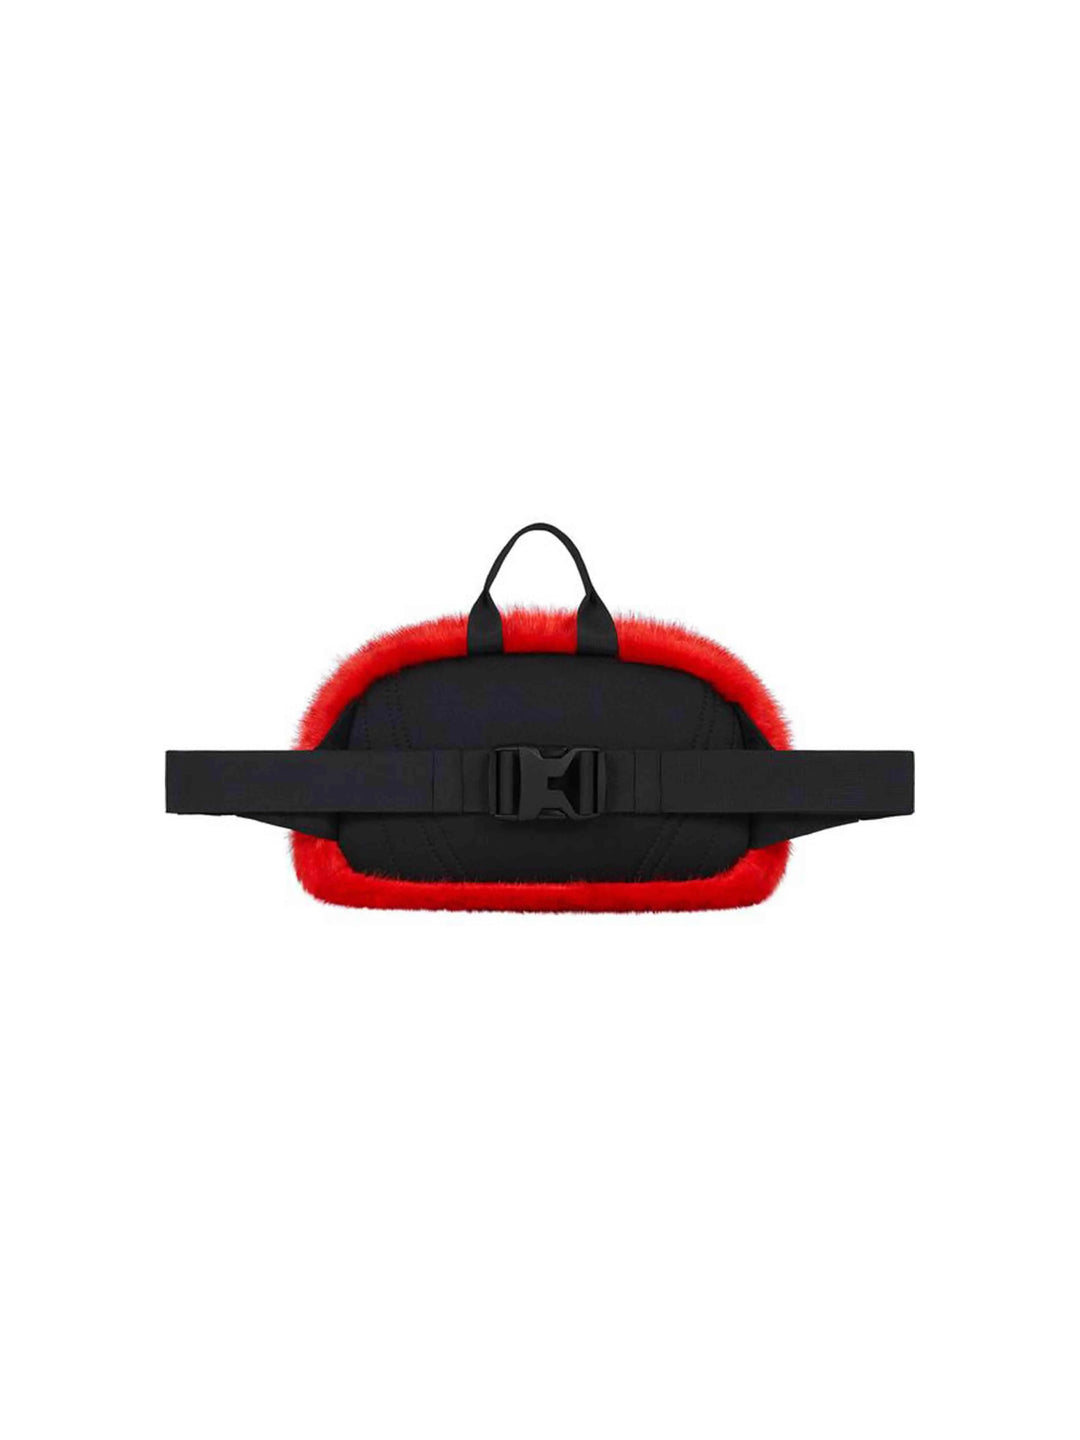 Supreme X The North Face Faux Fur Waist Bag Red [FW20] Prior